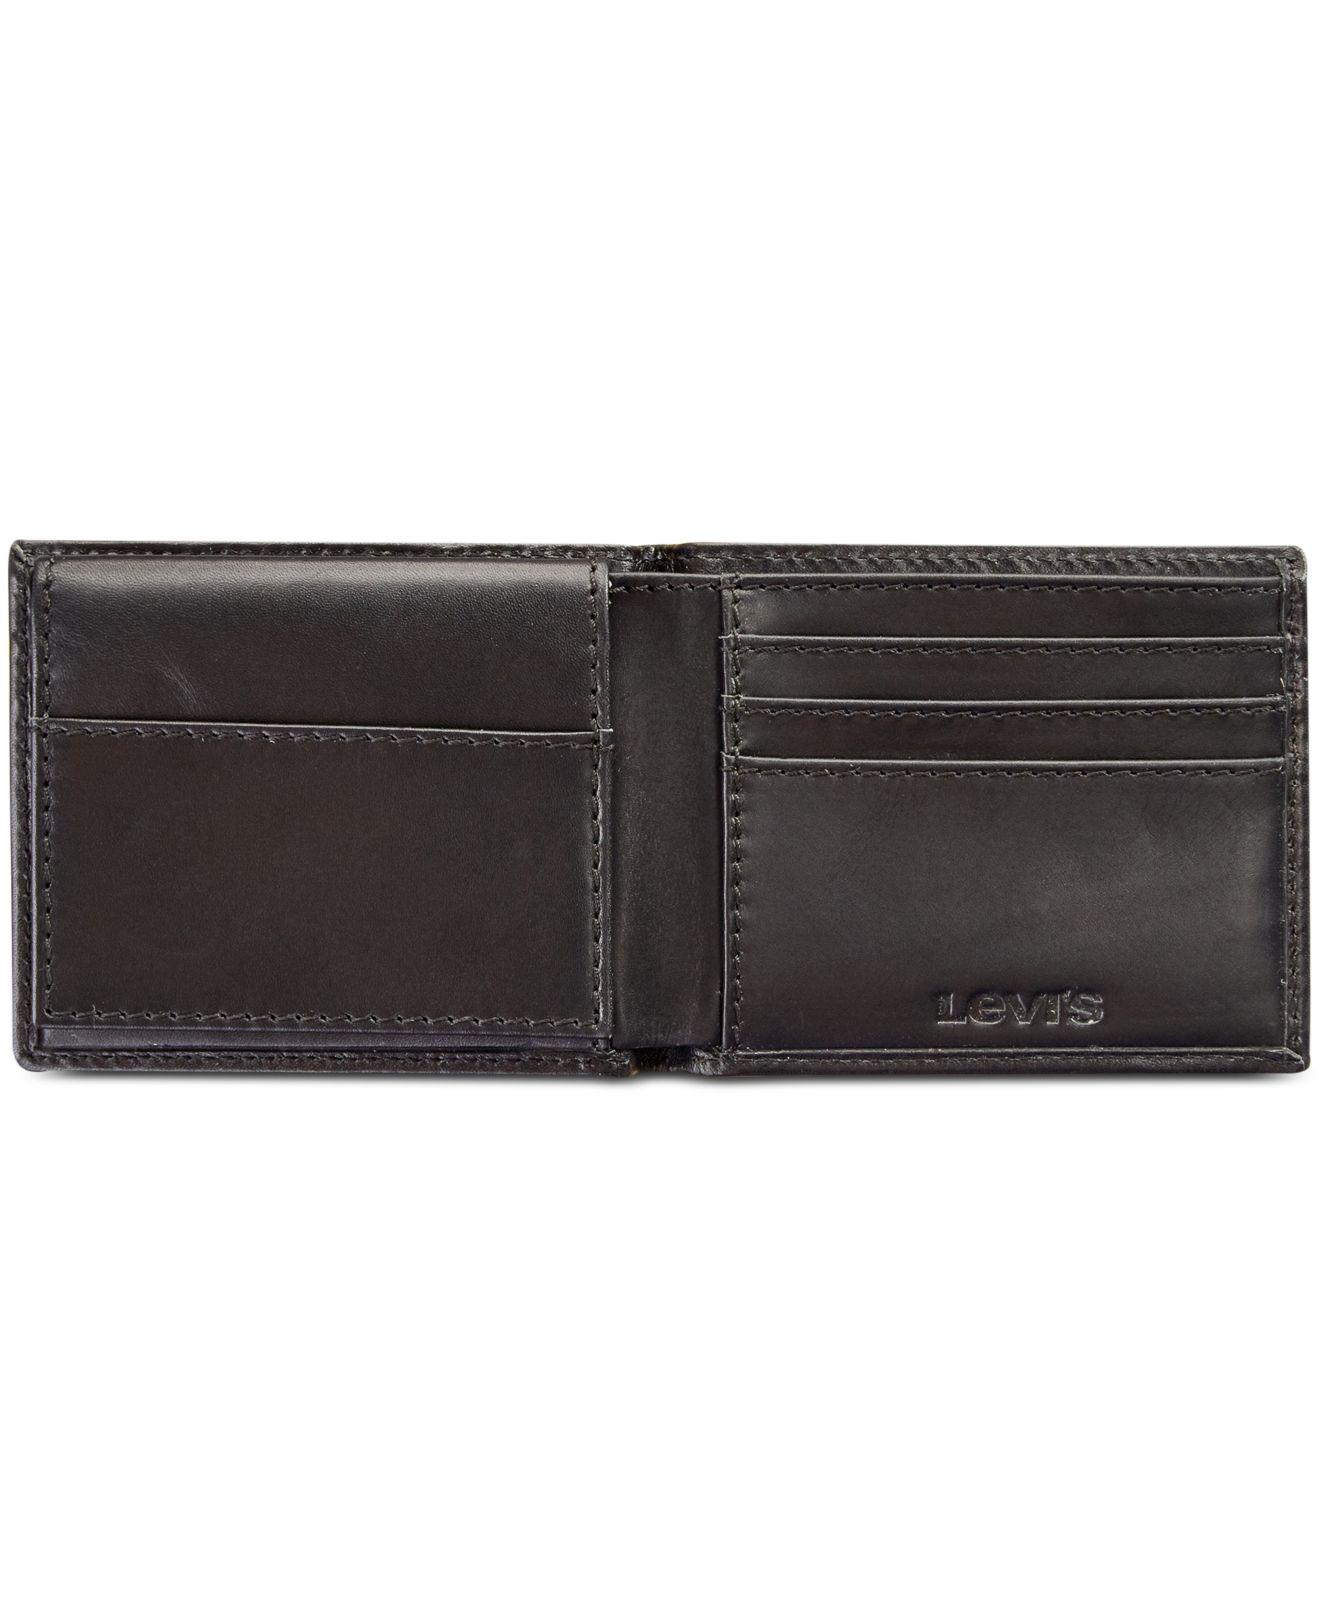 Levi's Rfid Bifold Leather Wallet in Black for Men - Lyst